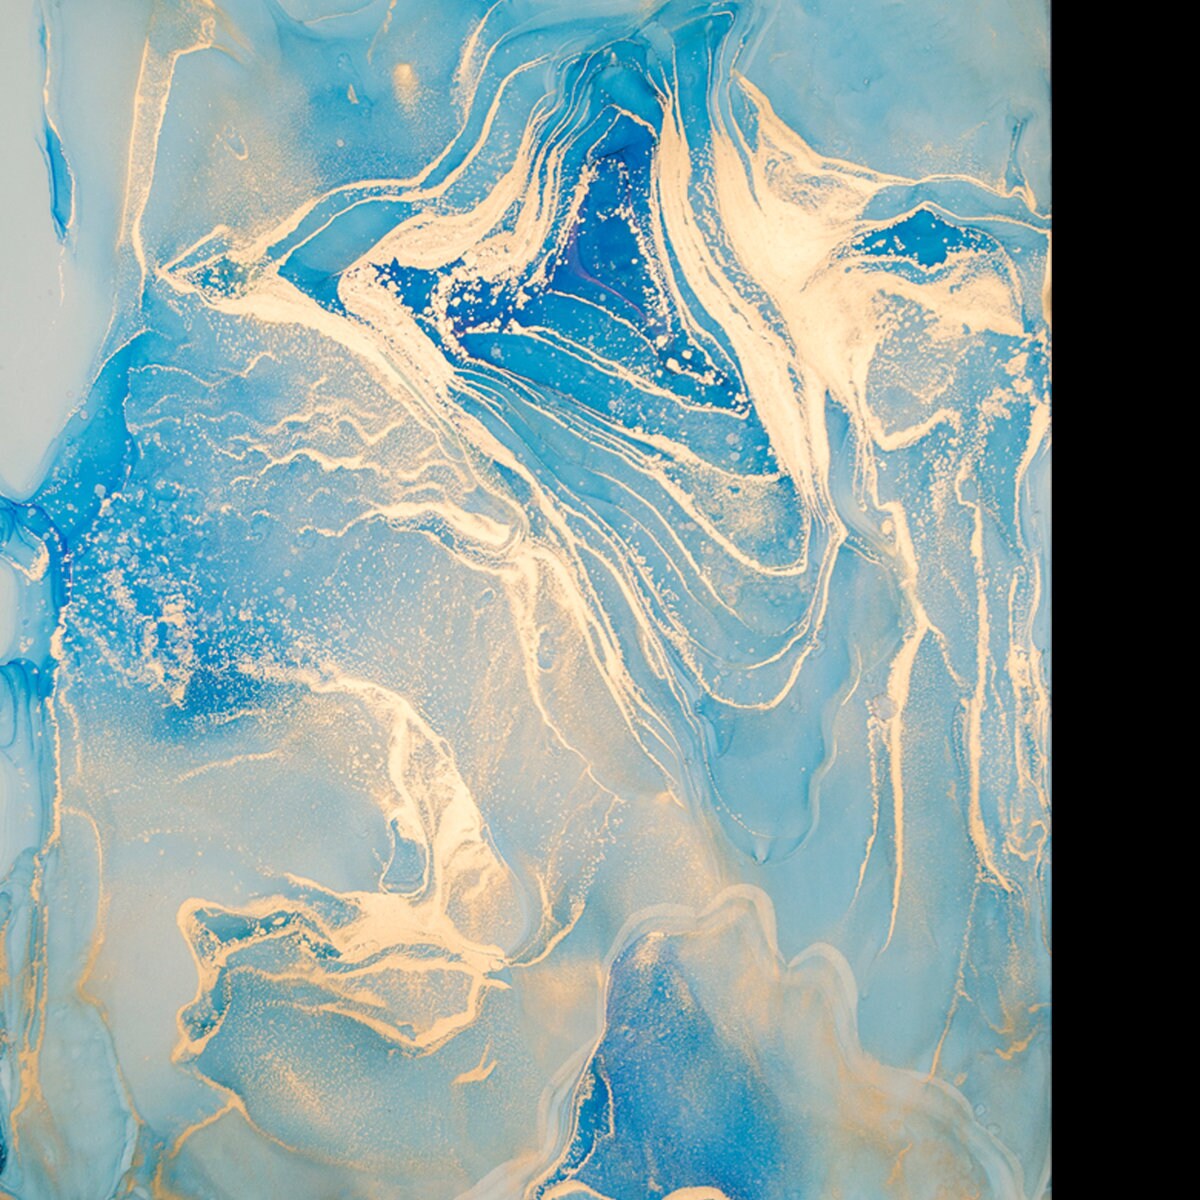 Luxury Abstract Fluid Art Painting, Mixture of Blue and Gold Paints. Imitation of Marble Stone Cut Wallpaper Living Room Mural